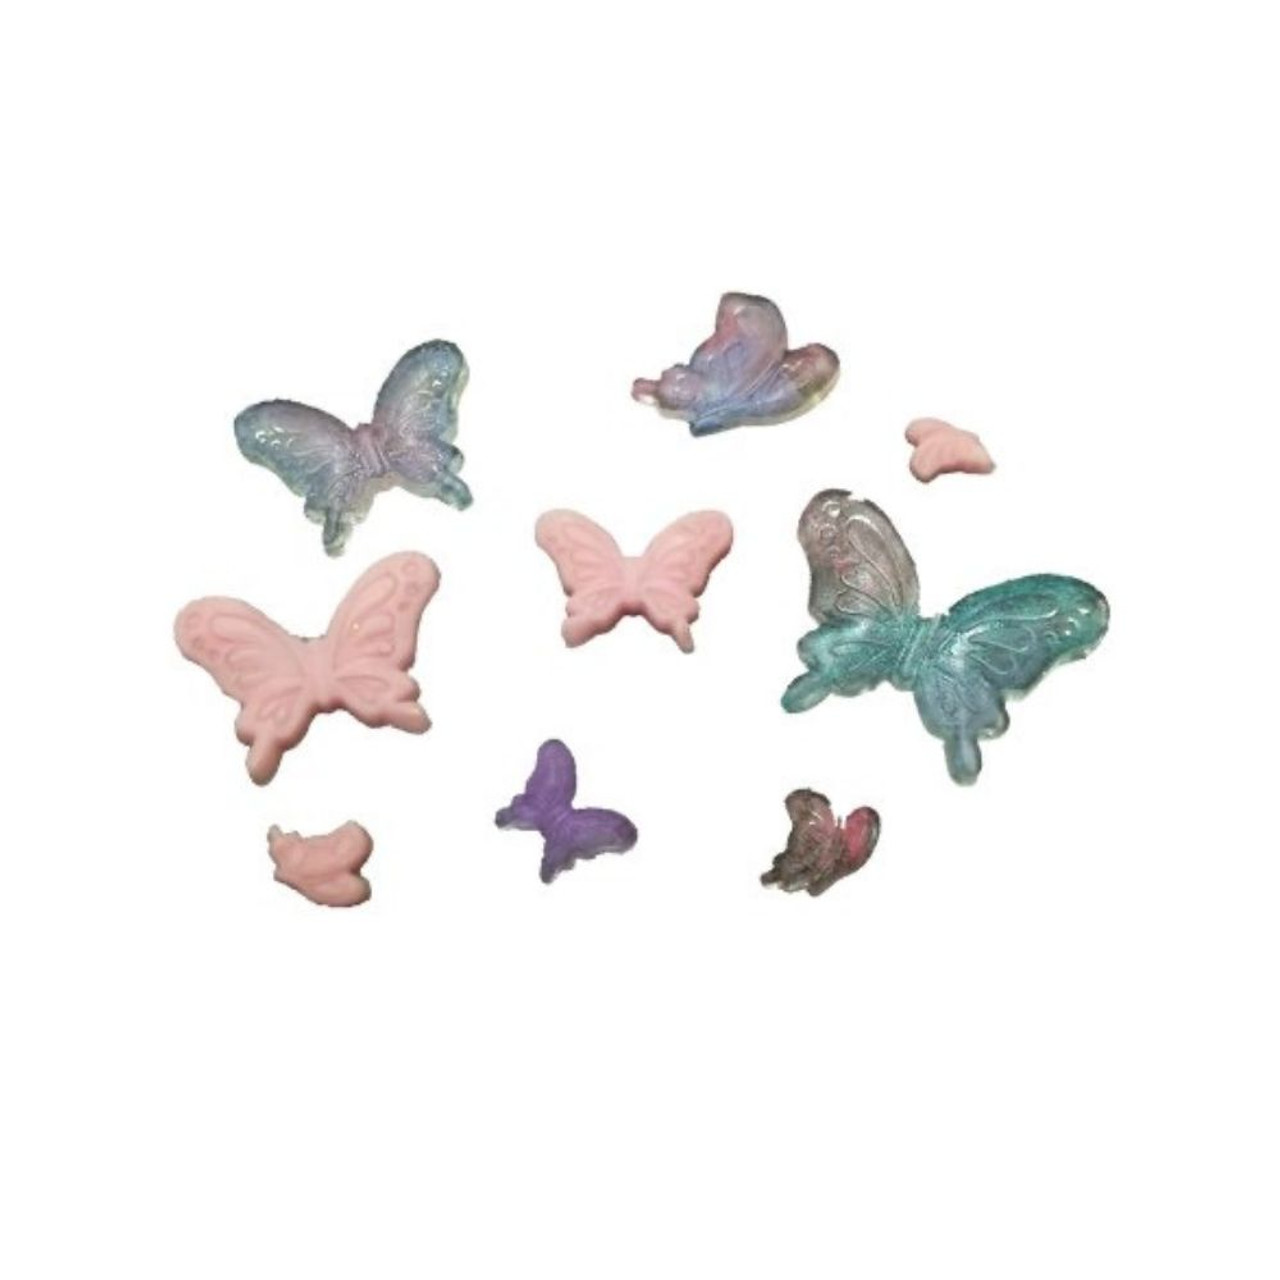 Butterflies made from the mould